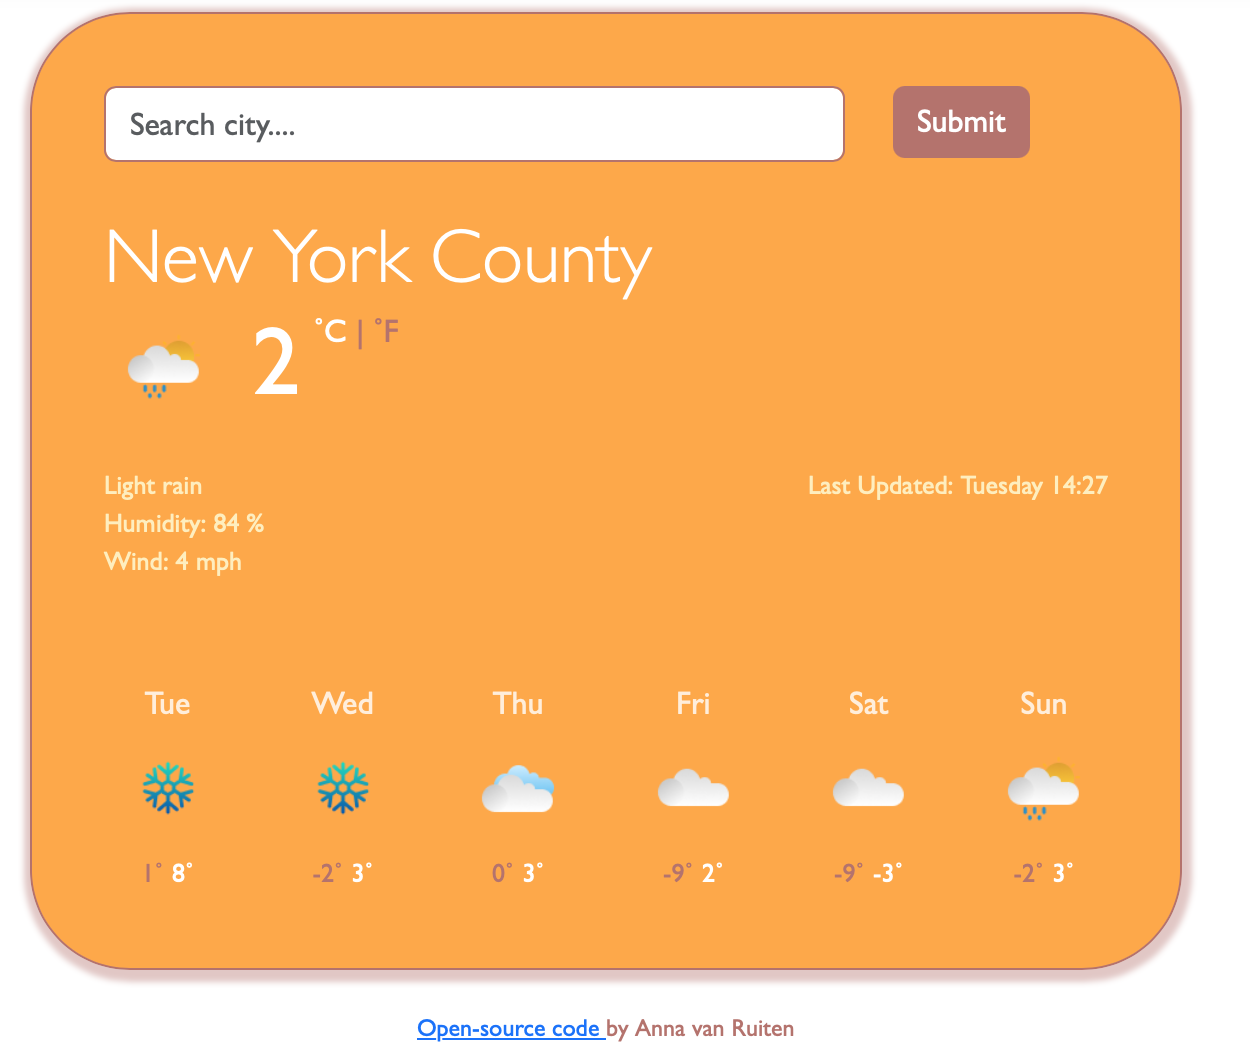 A weather app showcasing the weather of New York City